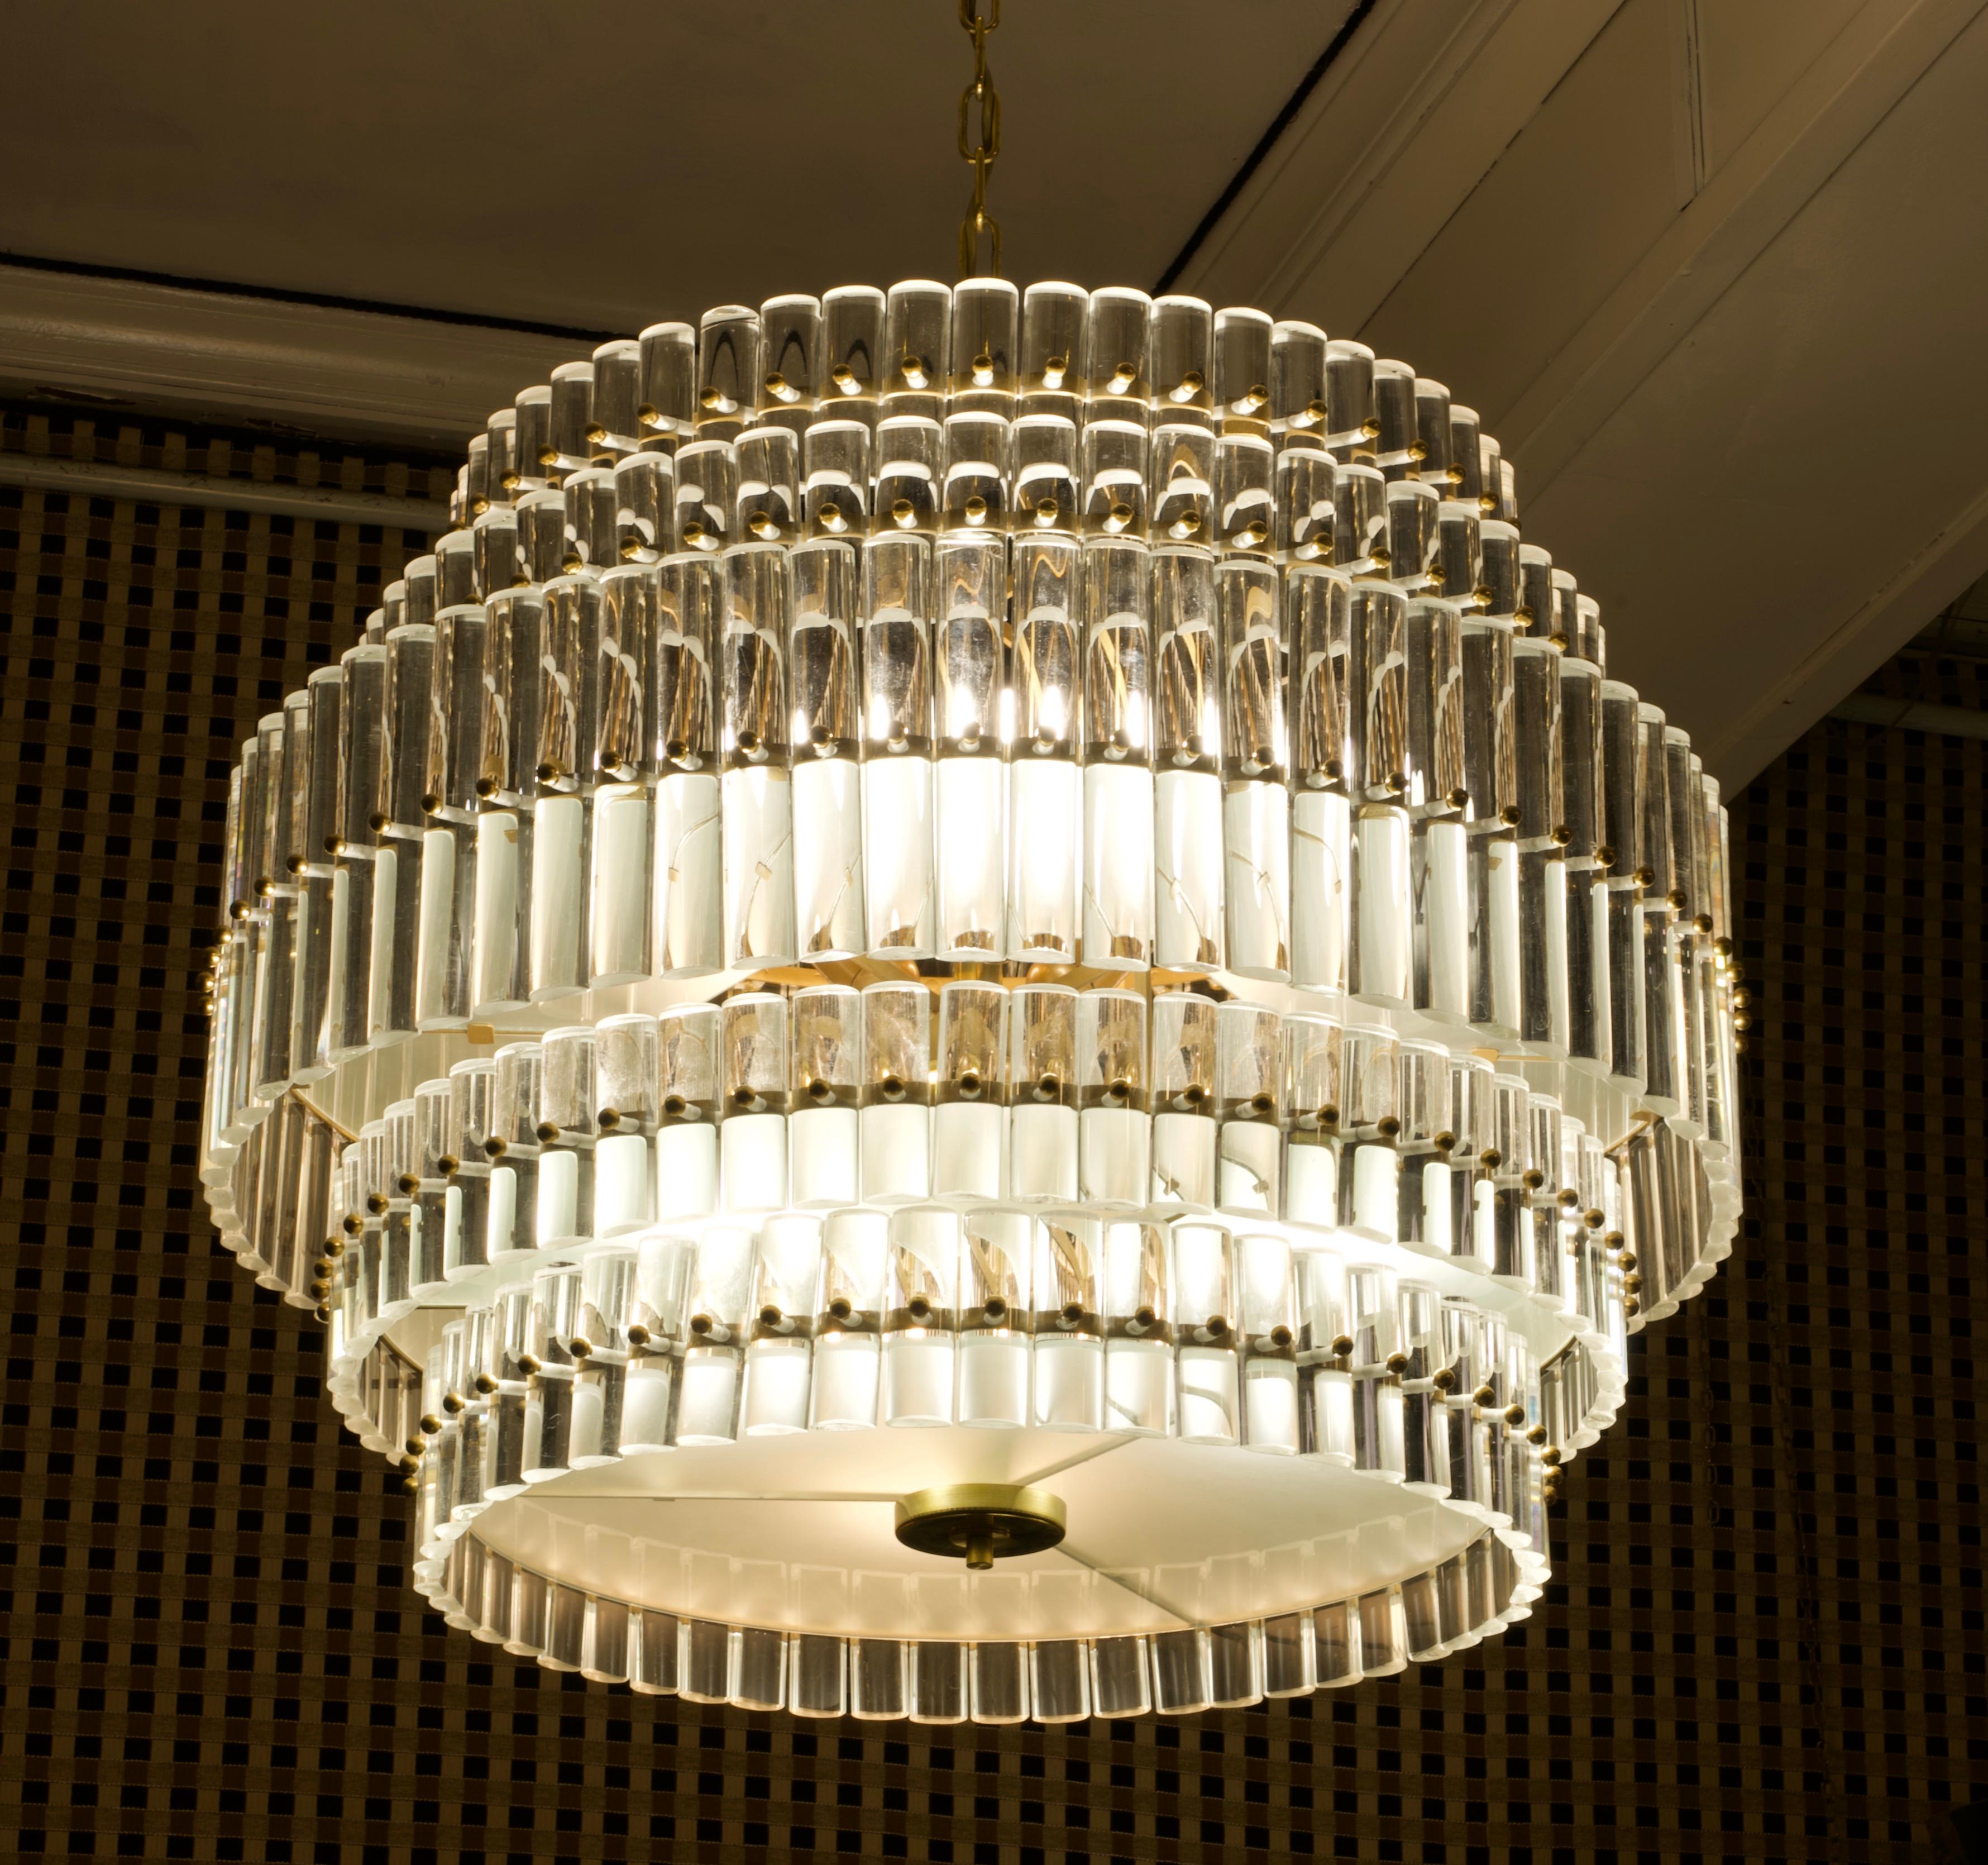 Fantastic round chandelier in Murano glass and polished brass, packed with small rods in half round of glass. The Murano furnaces create an indisputable timeless design, simple but elegant at the same time.

The chandelier is round in shape and